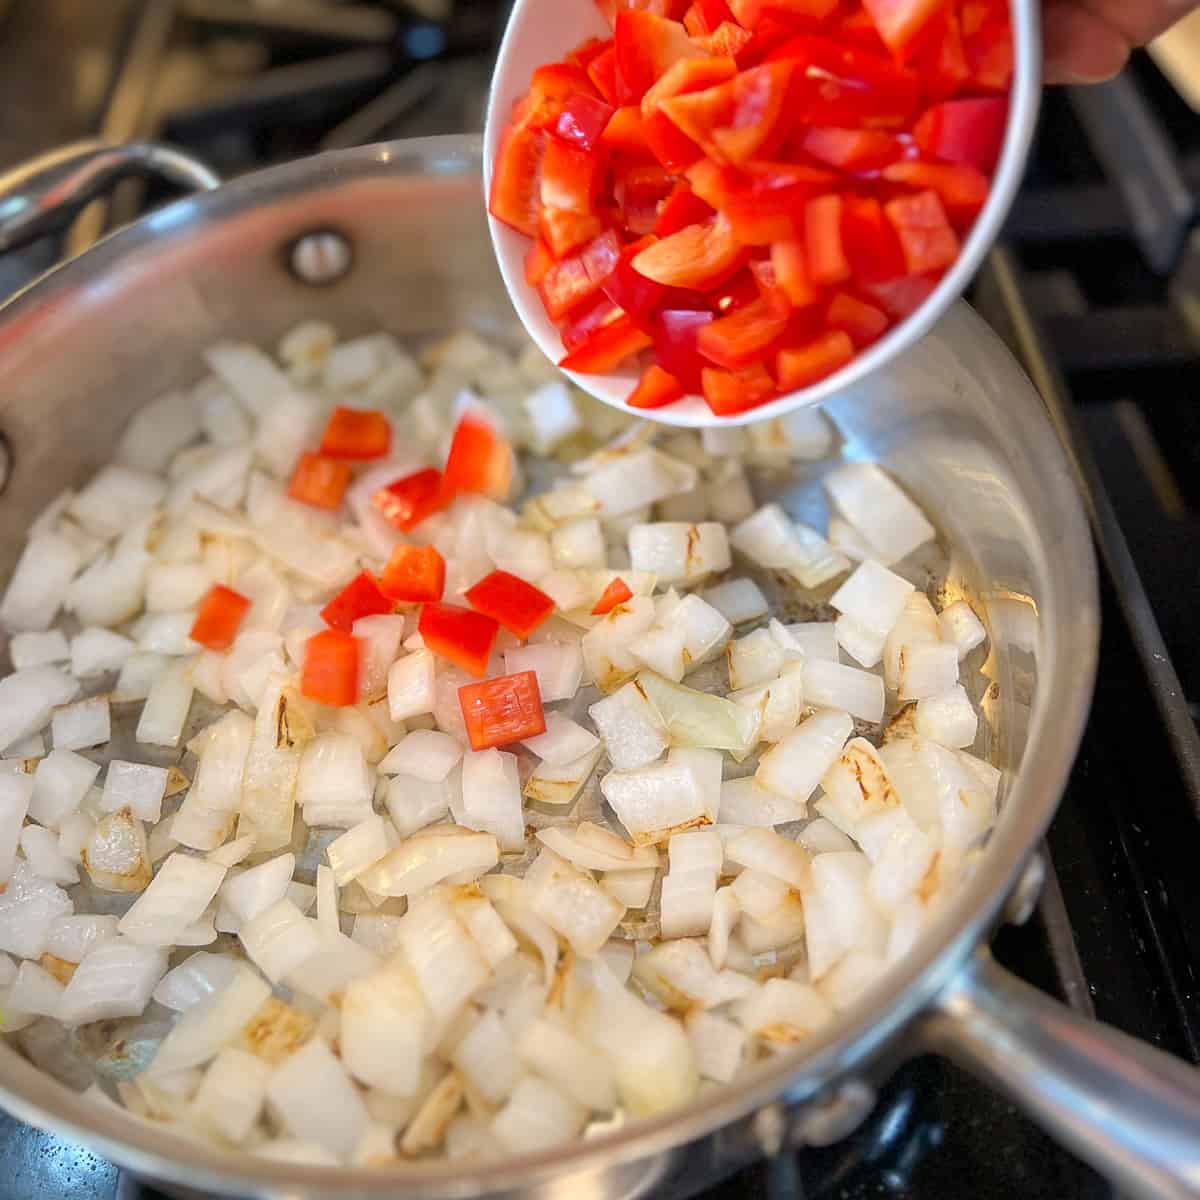 chopped red bell pepper being added to hot pan with onions